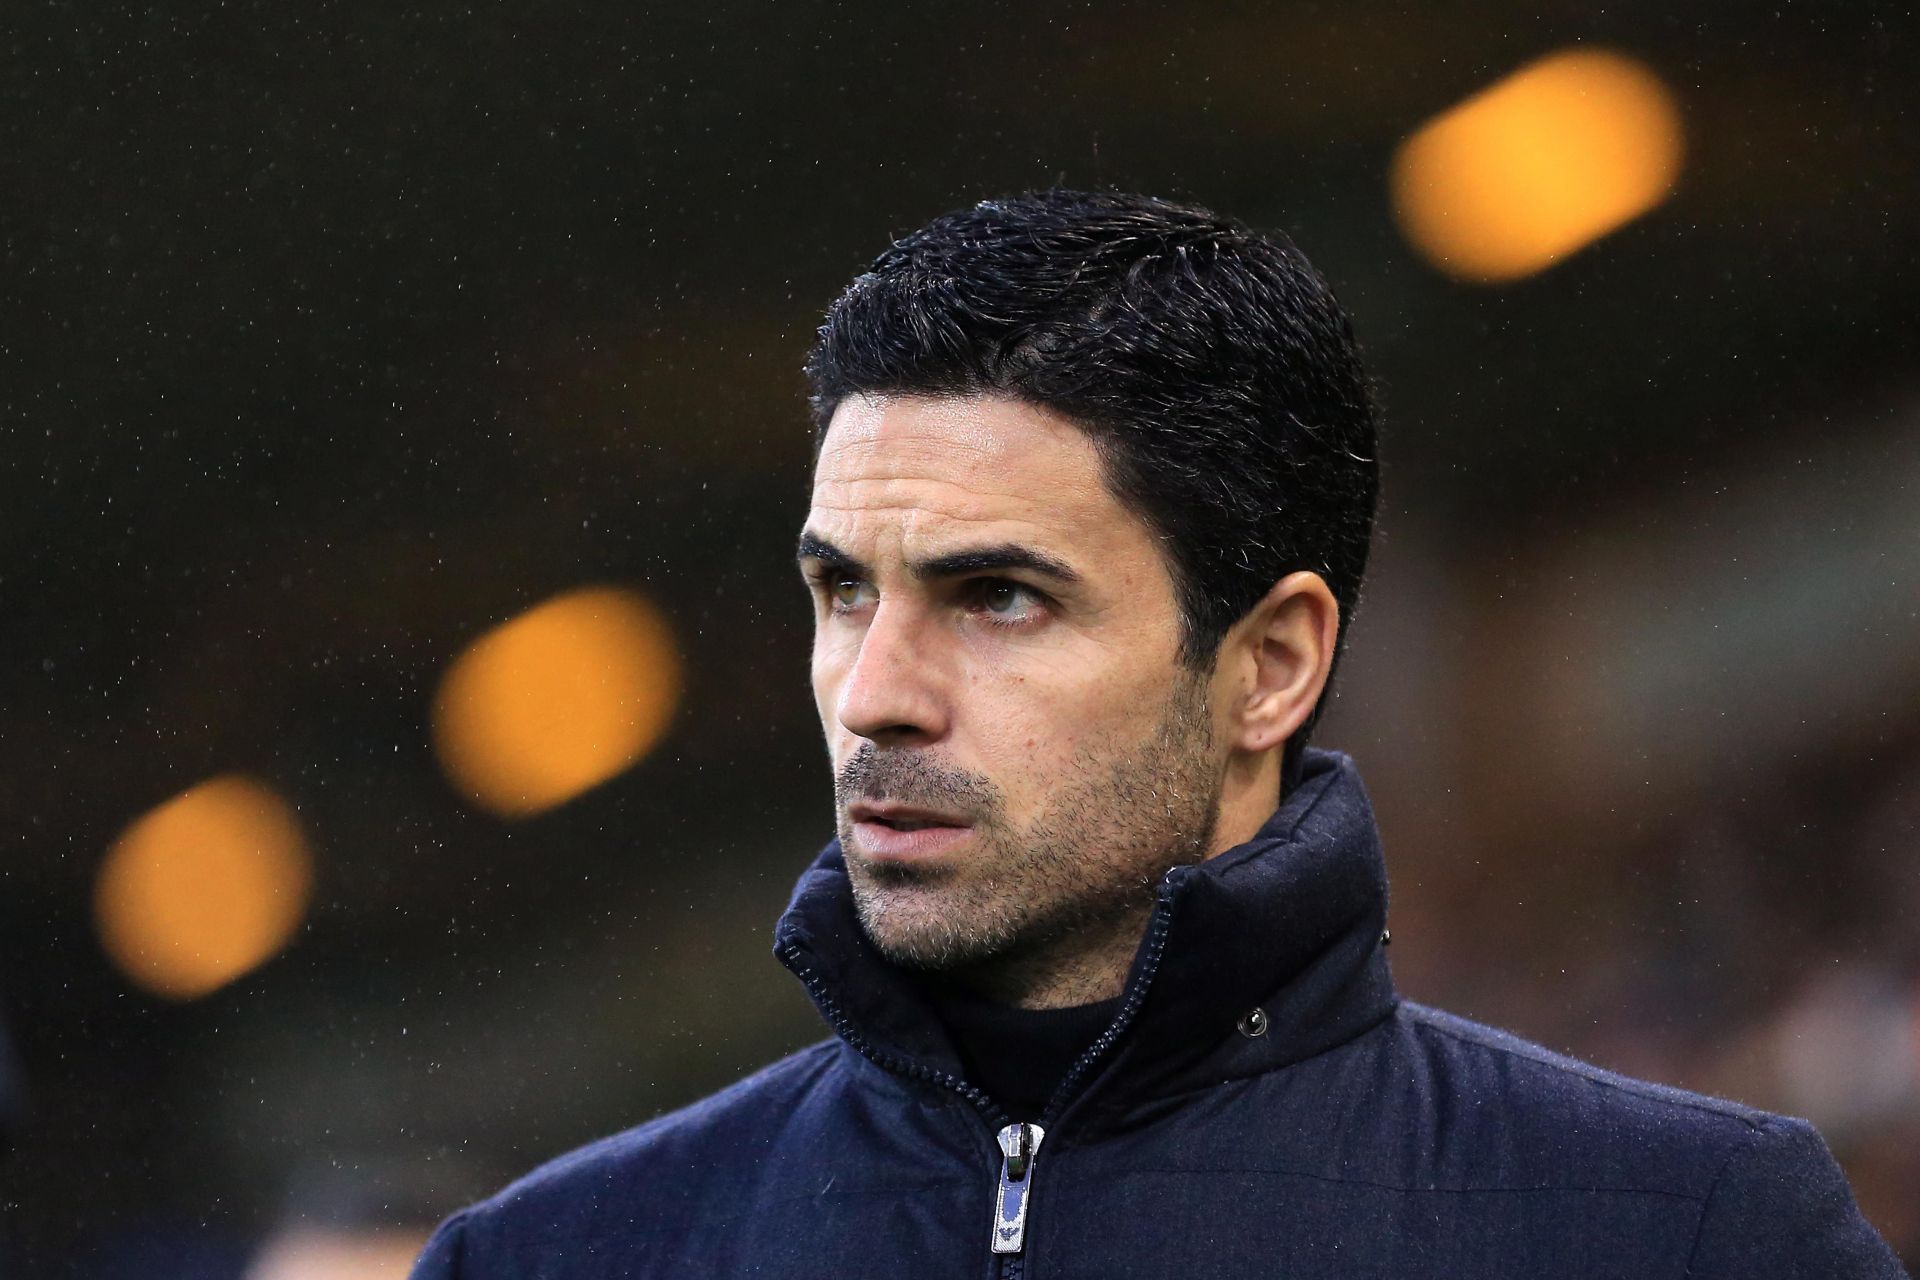 Arsenal manager Mikel Arteta is preparing to face Wolves.